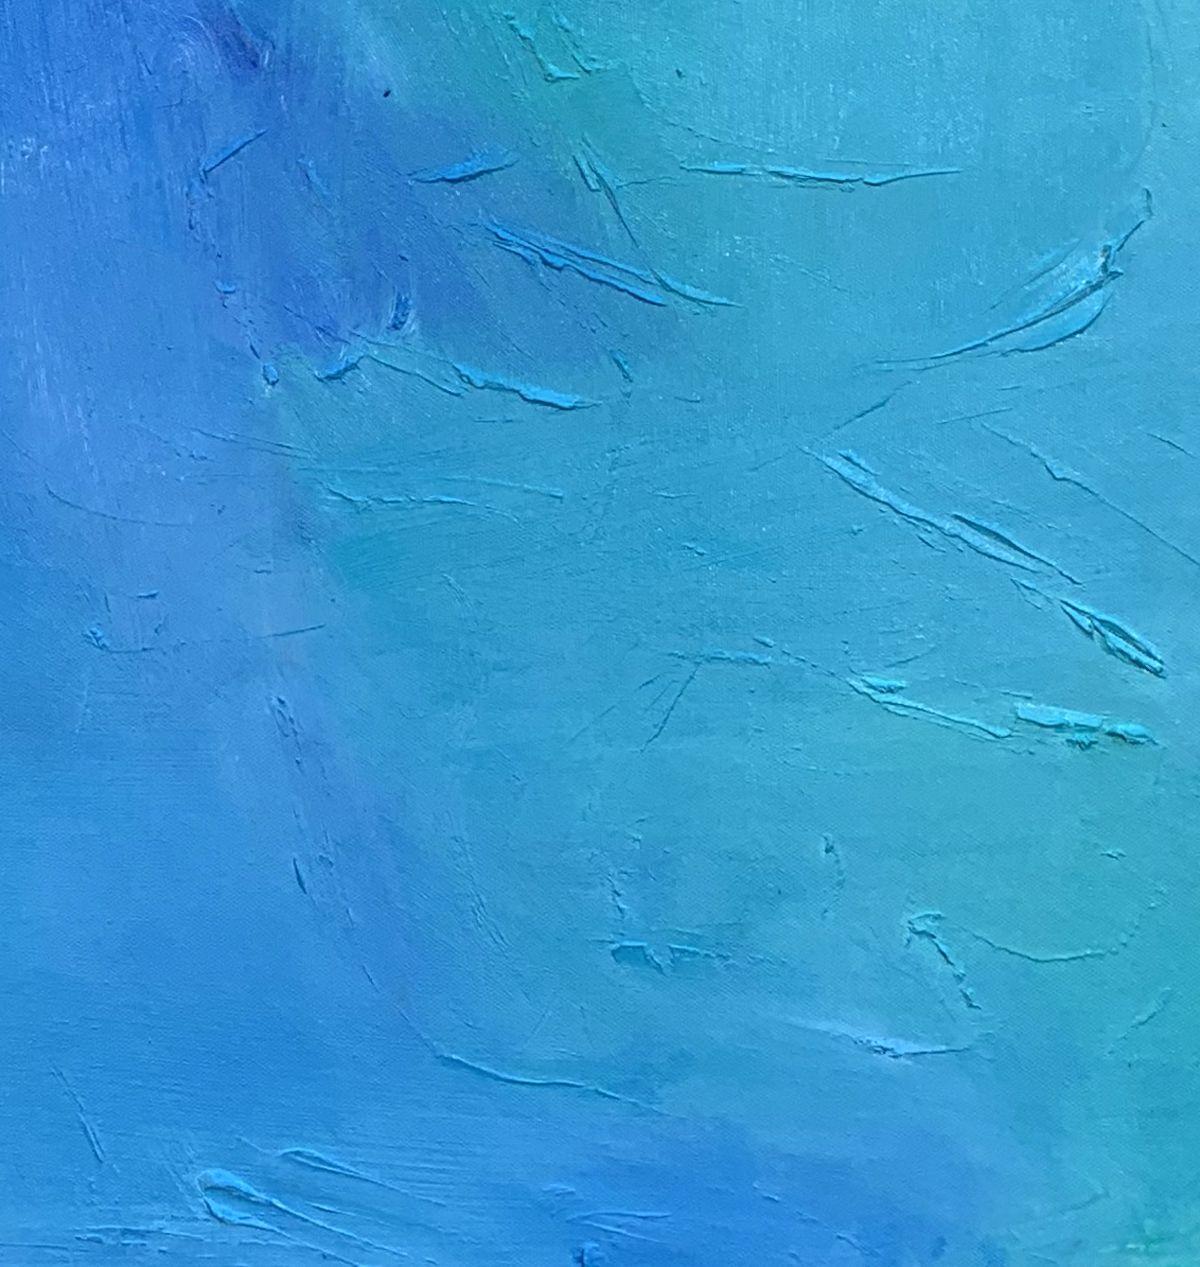 Meditation, Painting, Oil on Canvas - Blue Abstract Painting by Trixie Pitts